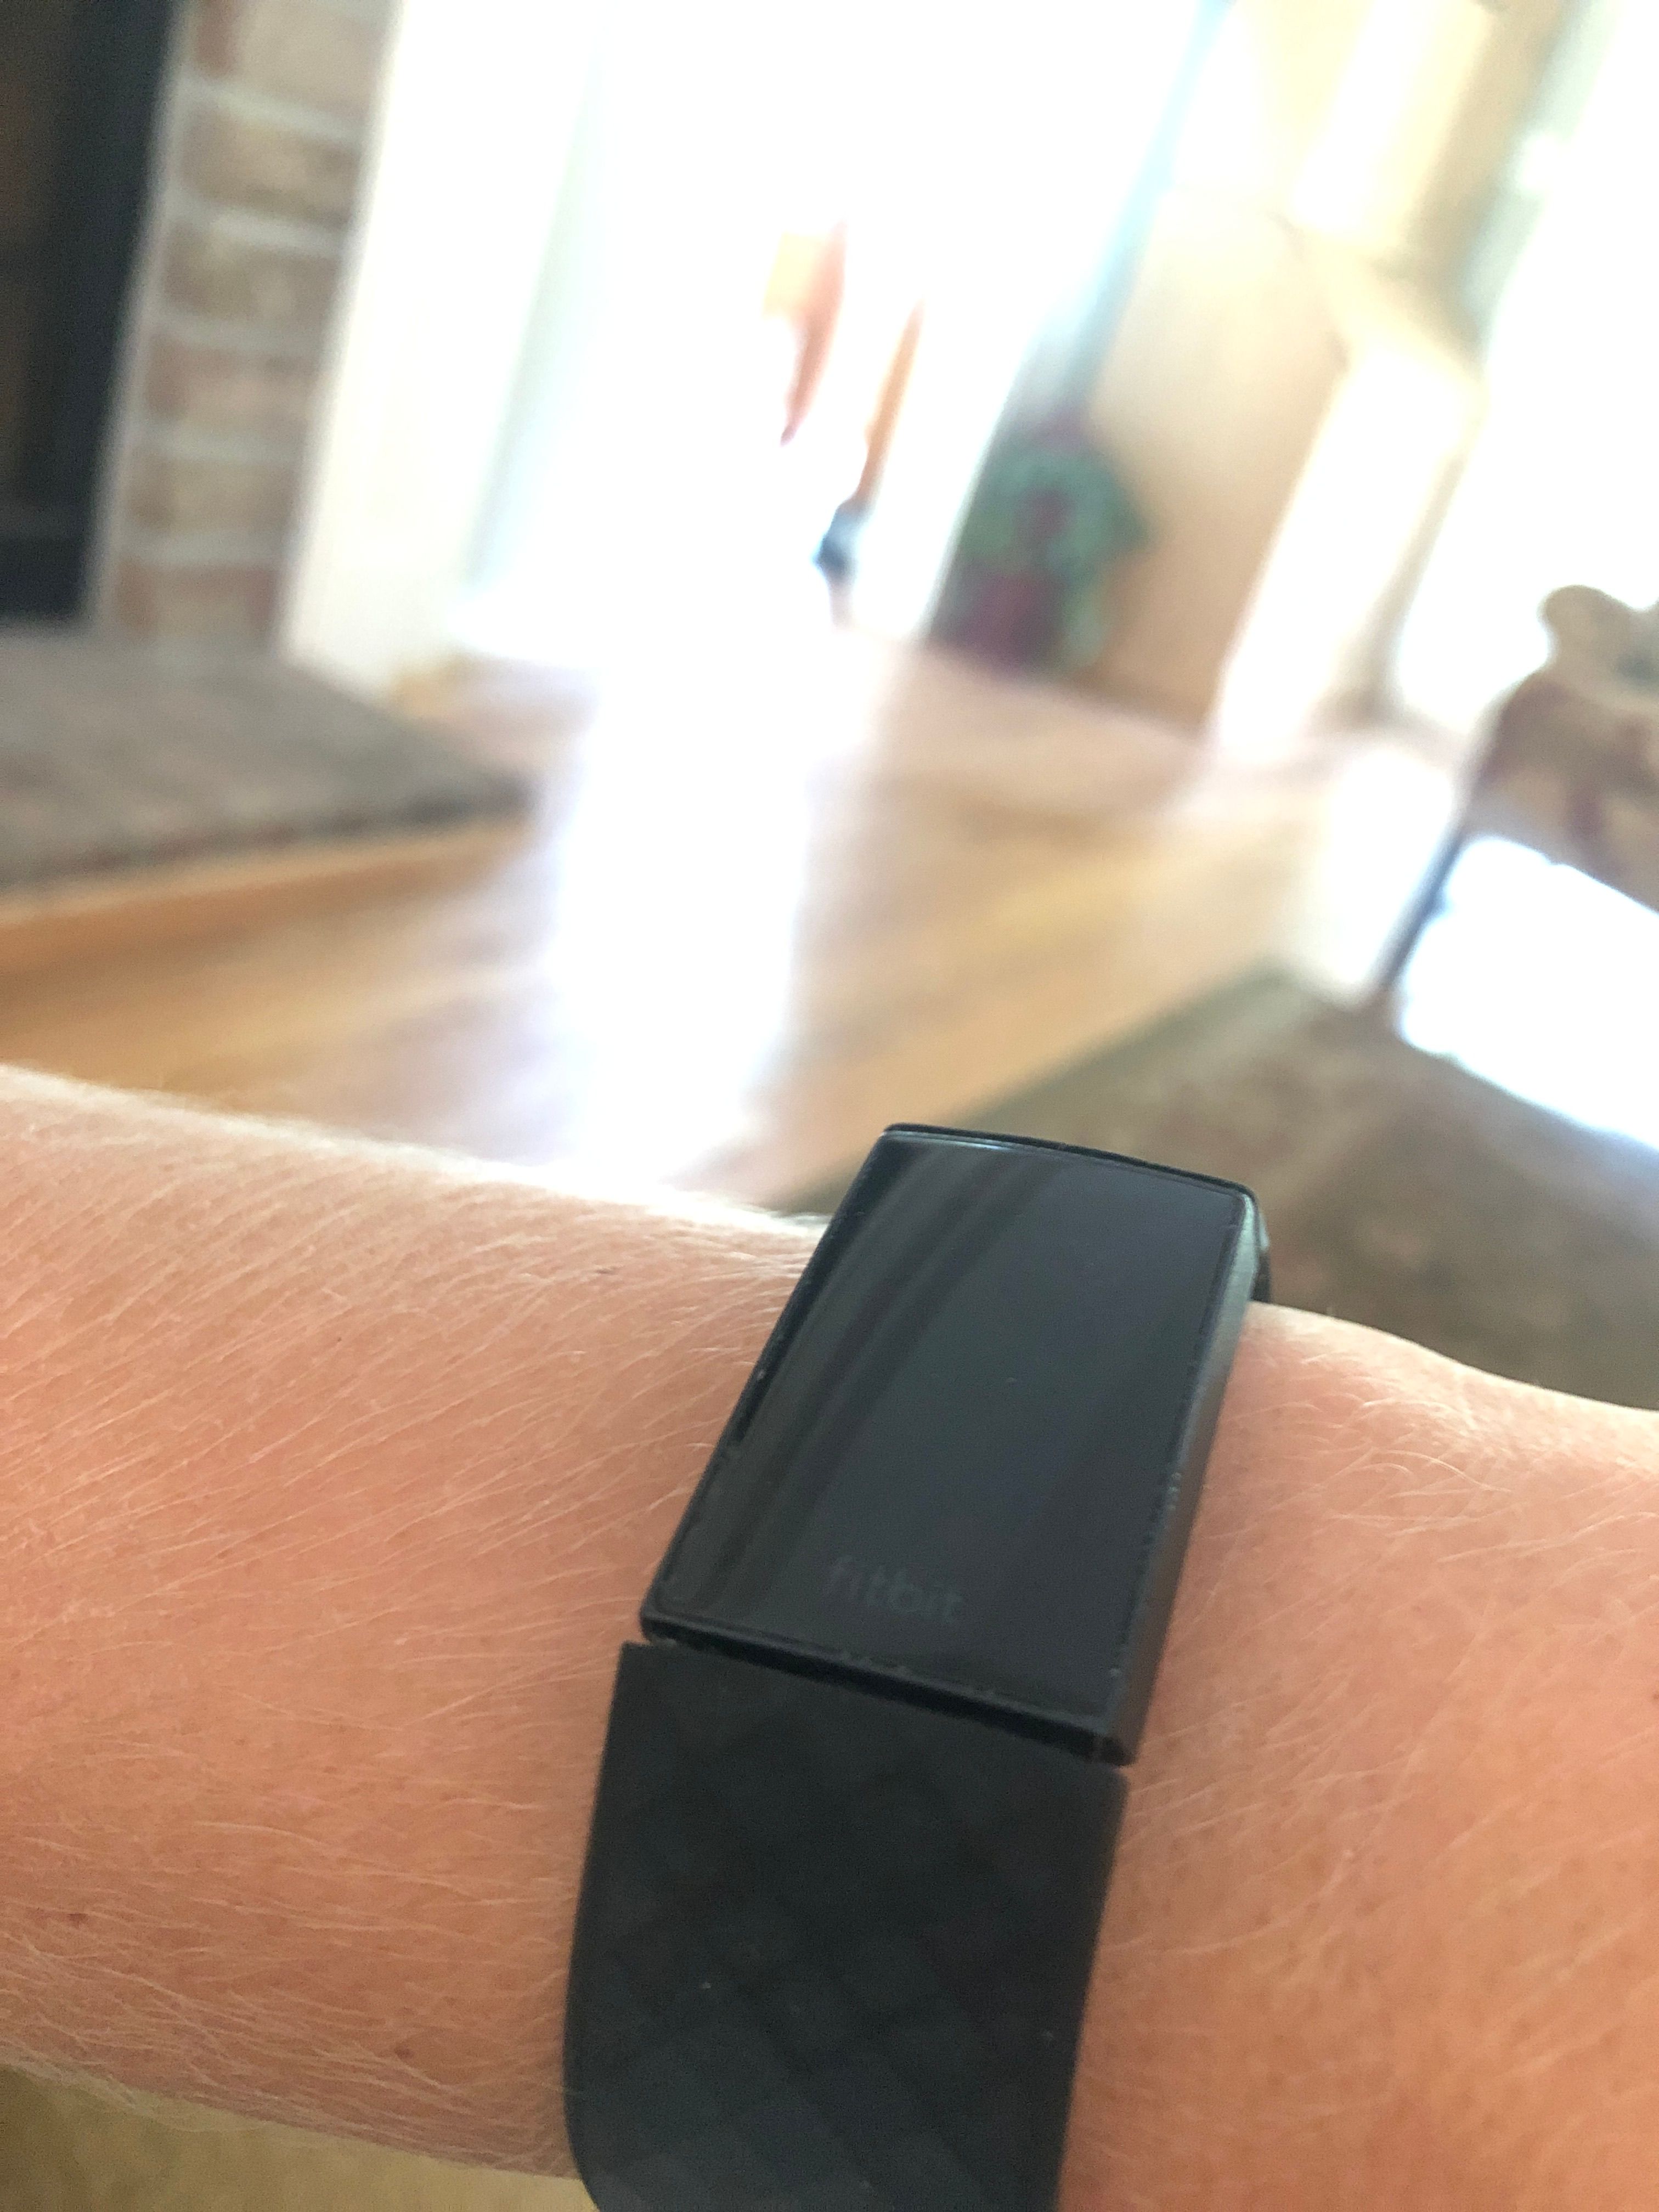 fitbit charge 4 band issues